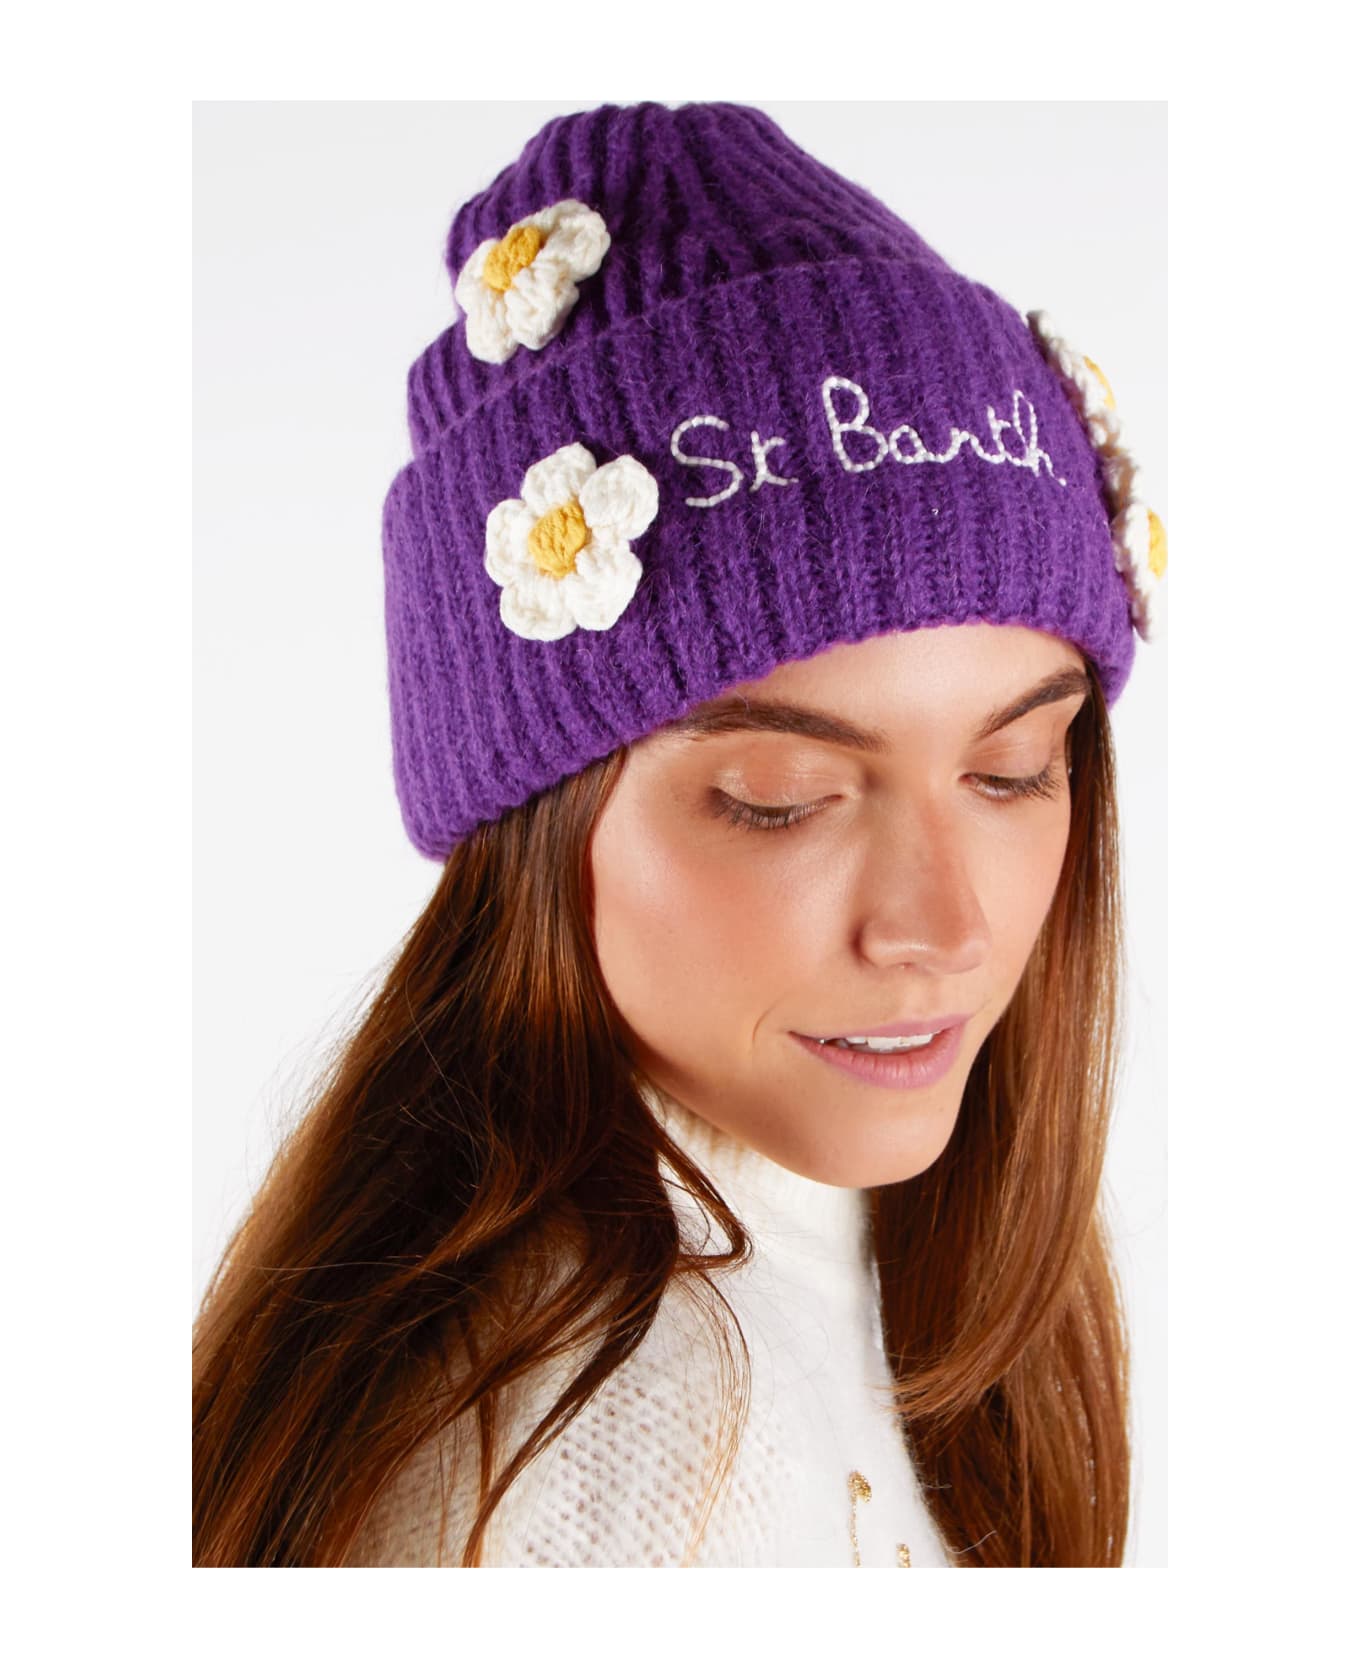 MC2 Saint Barth Woman Brushed And Ultra Soft Beanie With Daisies Appliqués - PURPLE